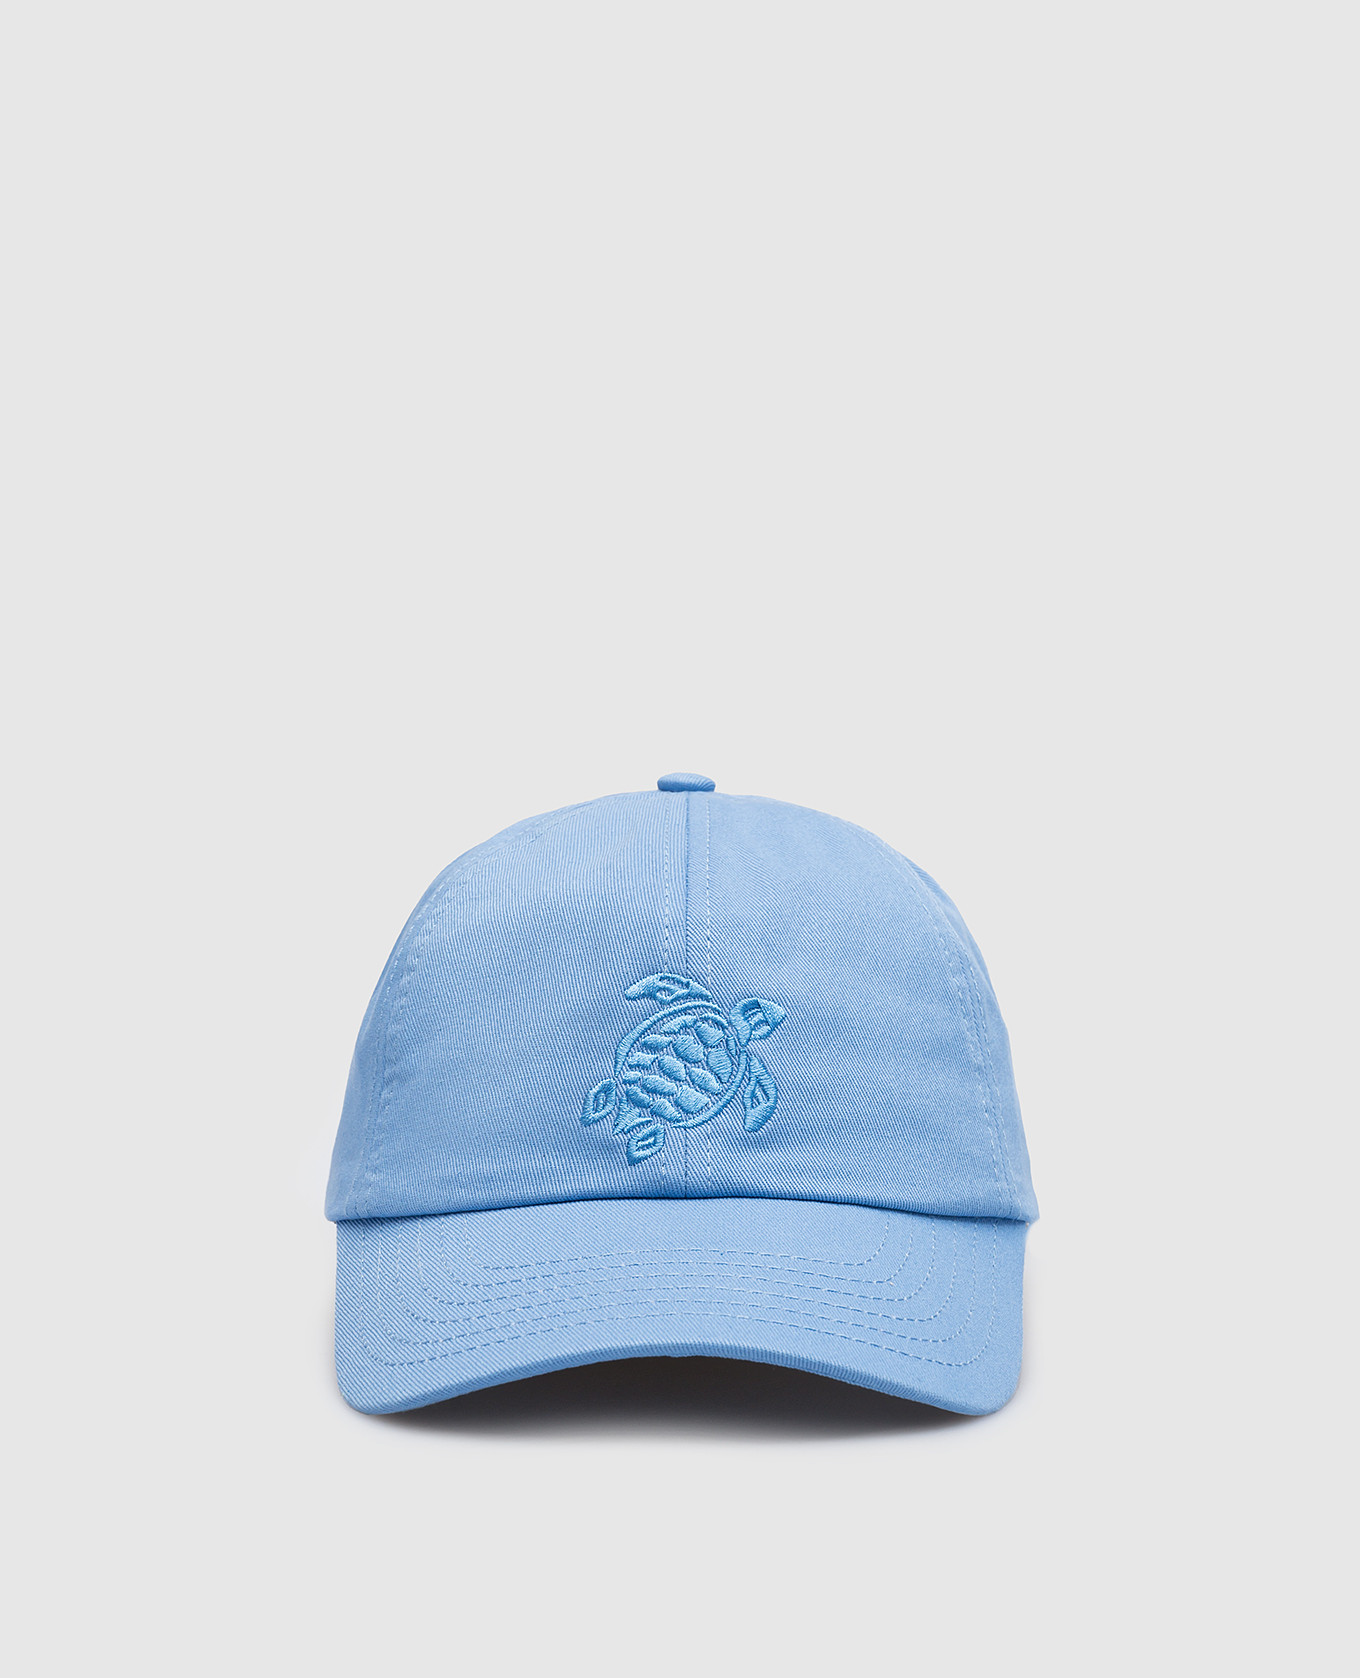 Blue cap with embroidery